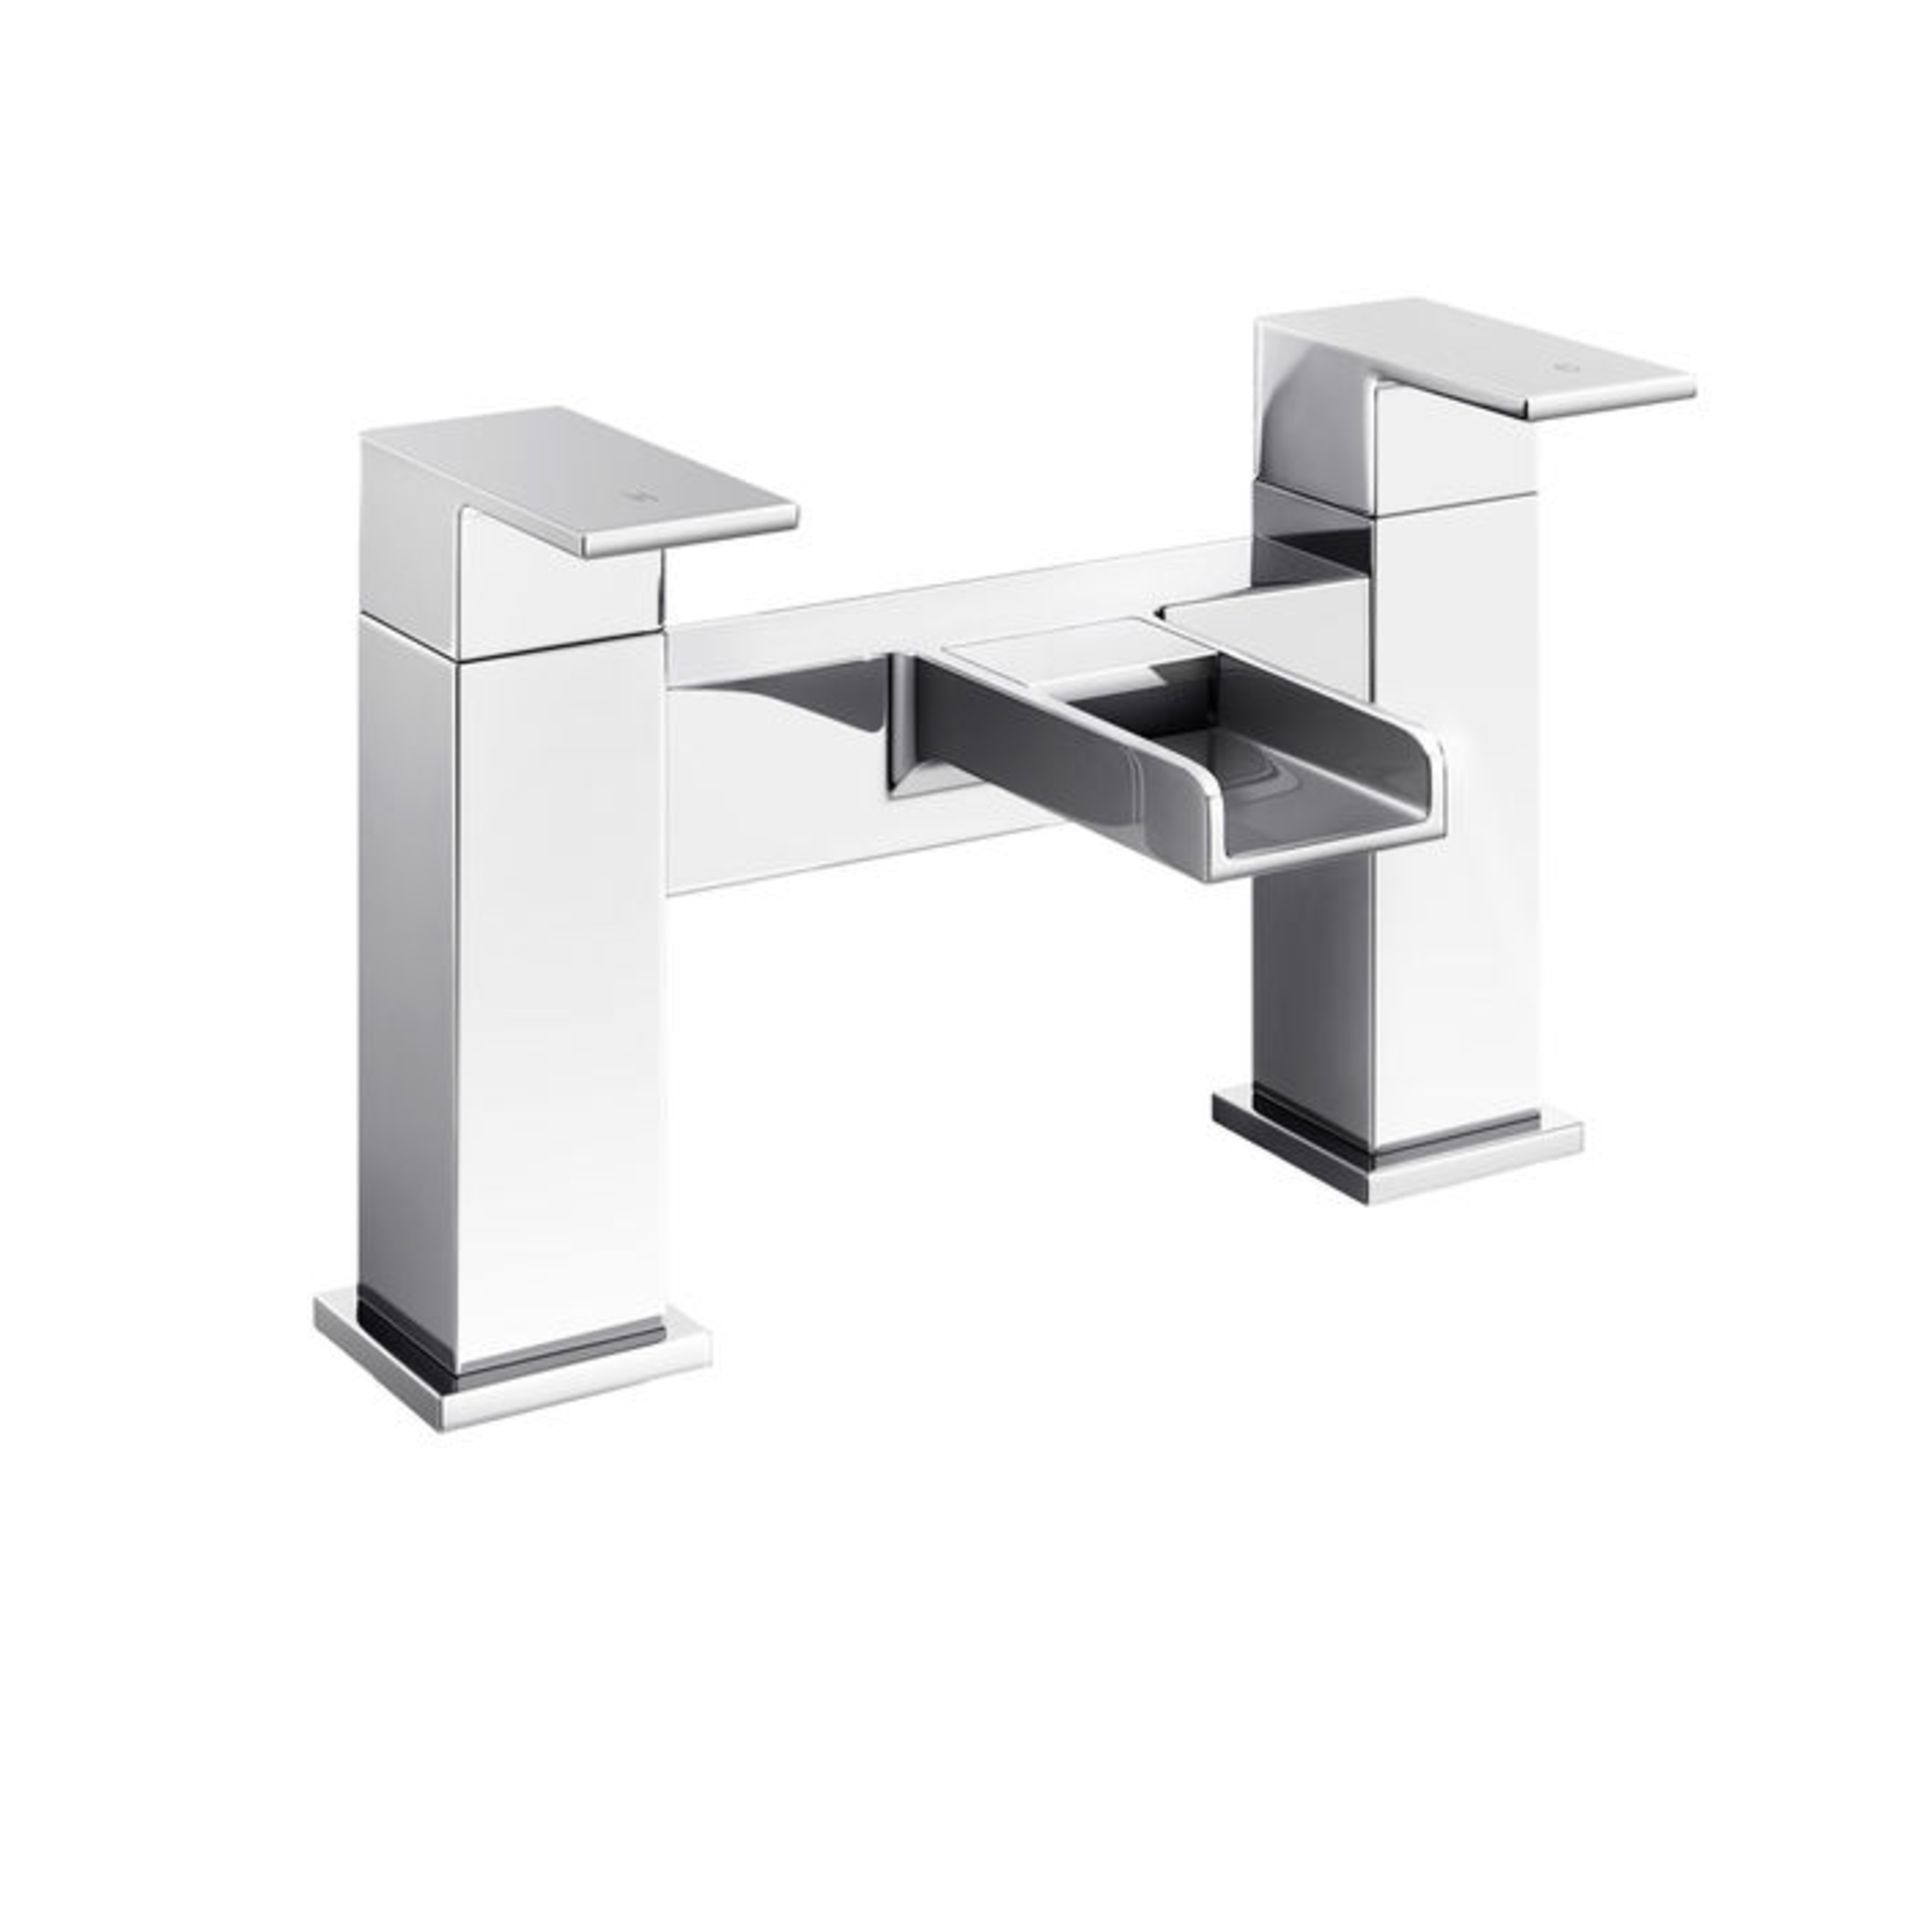 New & Boxed Niagra Waterfall Bath Mixer Taps. Tb3108.Chrome Plated Solid Brass 1/4 Turn - Image 2 of 2